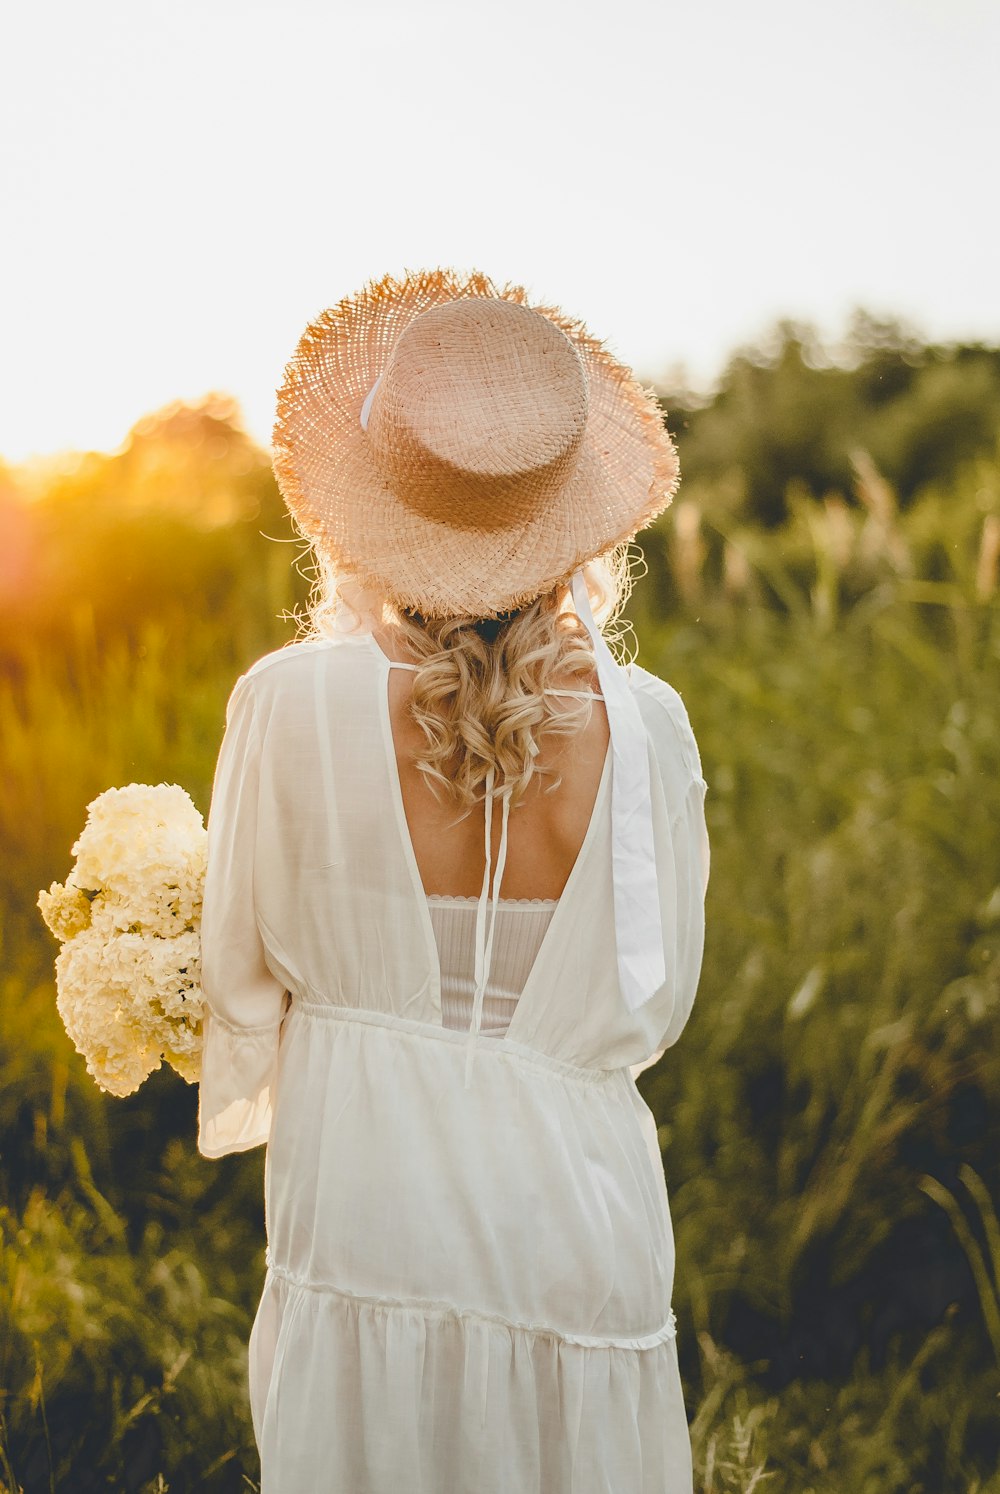 woman in white dress wearing brown sun hat standing on yellow flower field during daytime